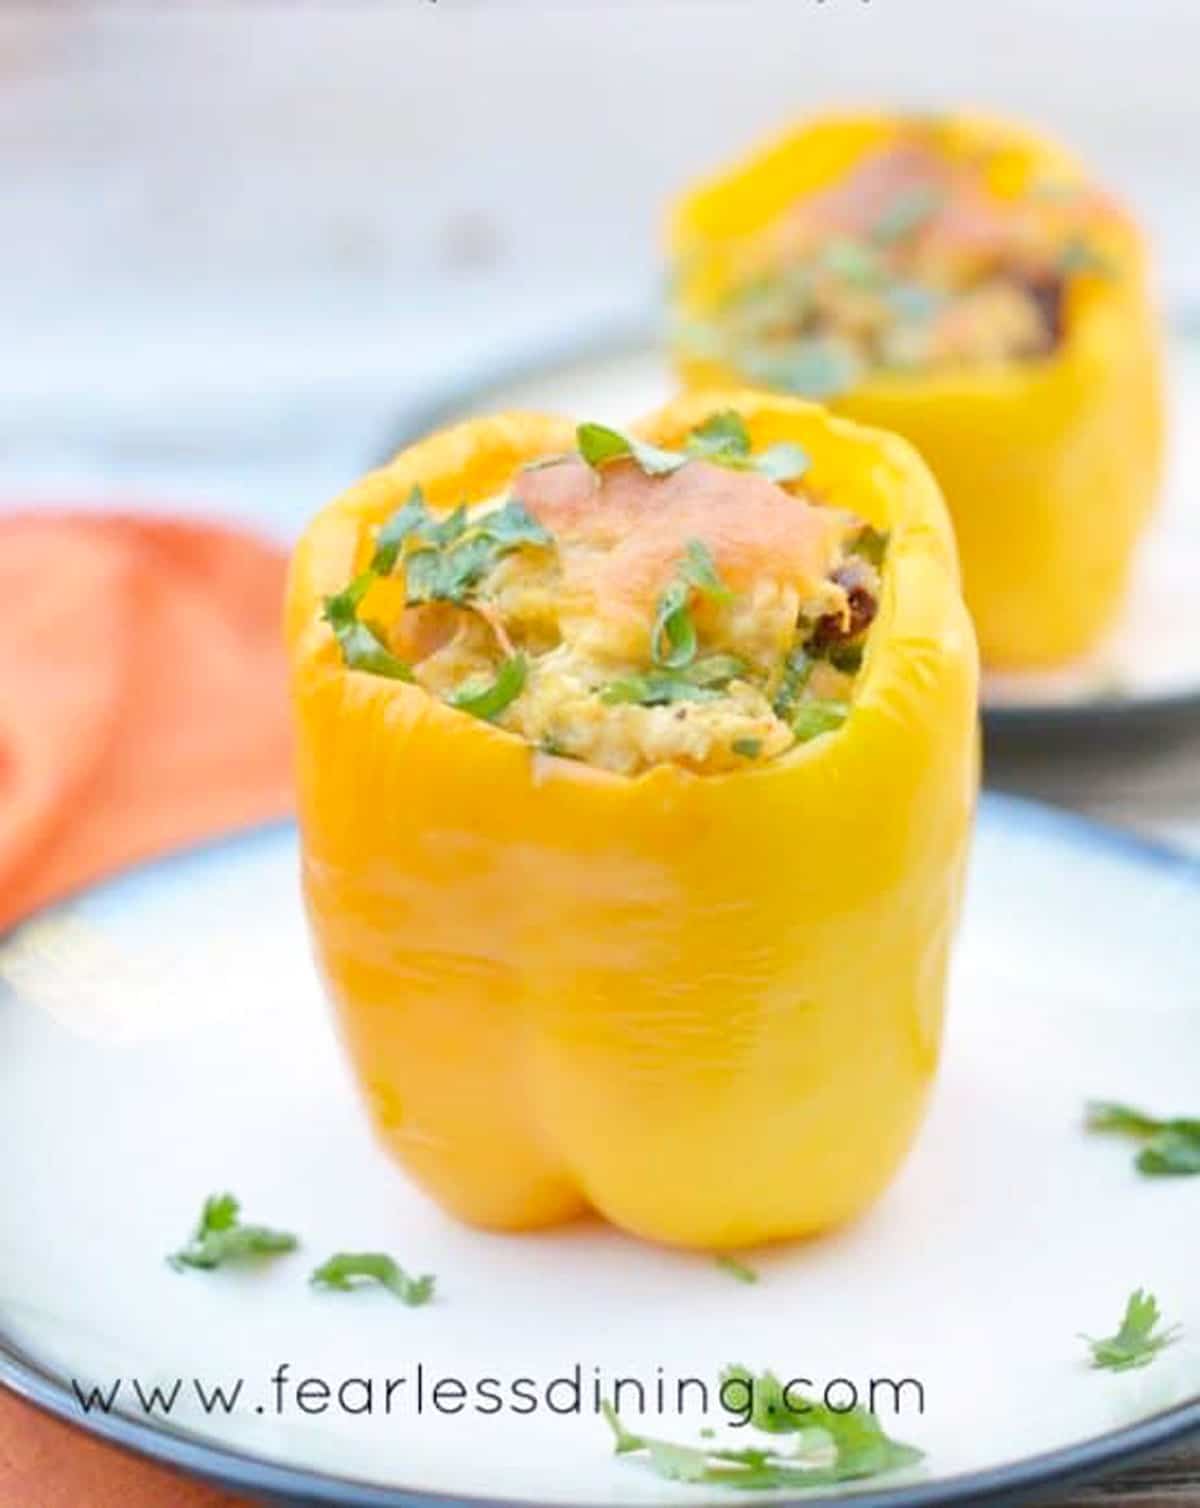 stuffed yellow peppers on two plates